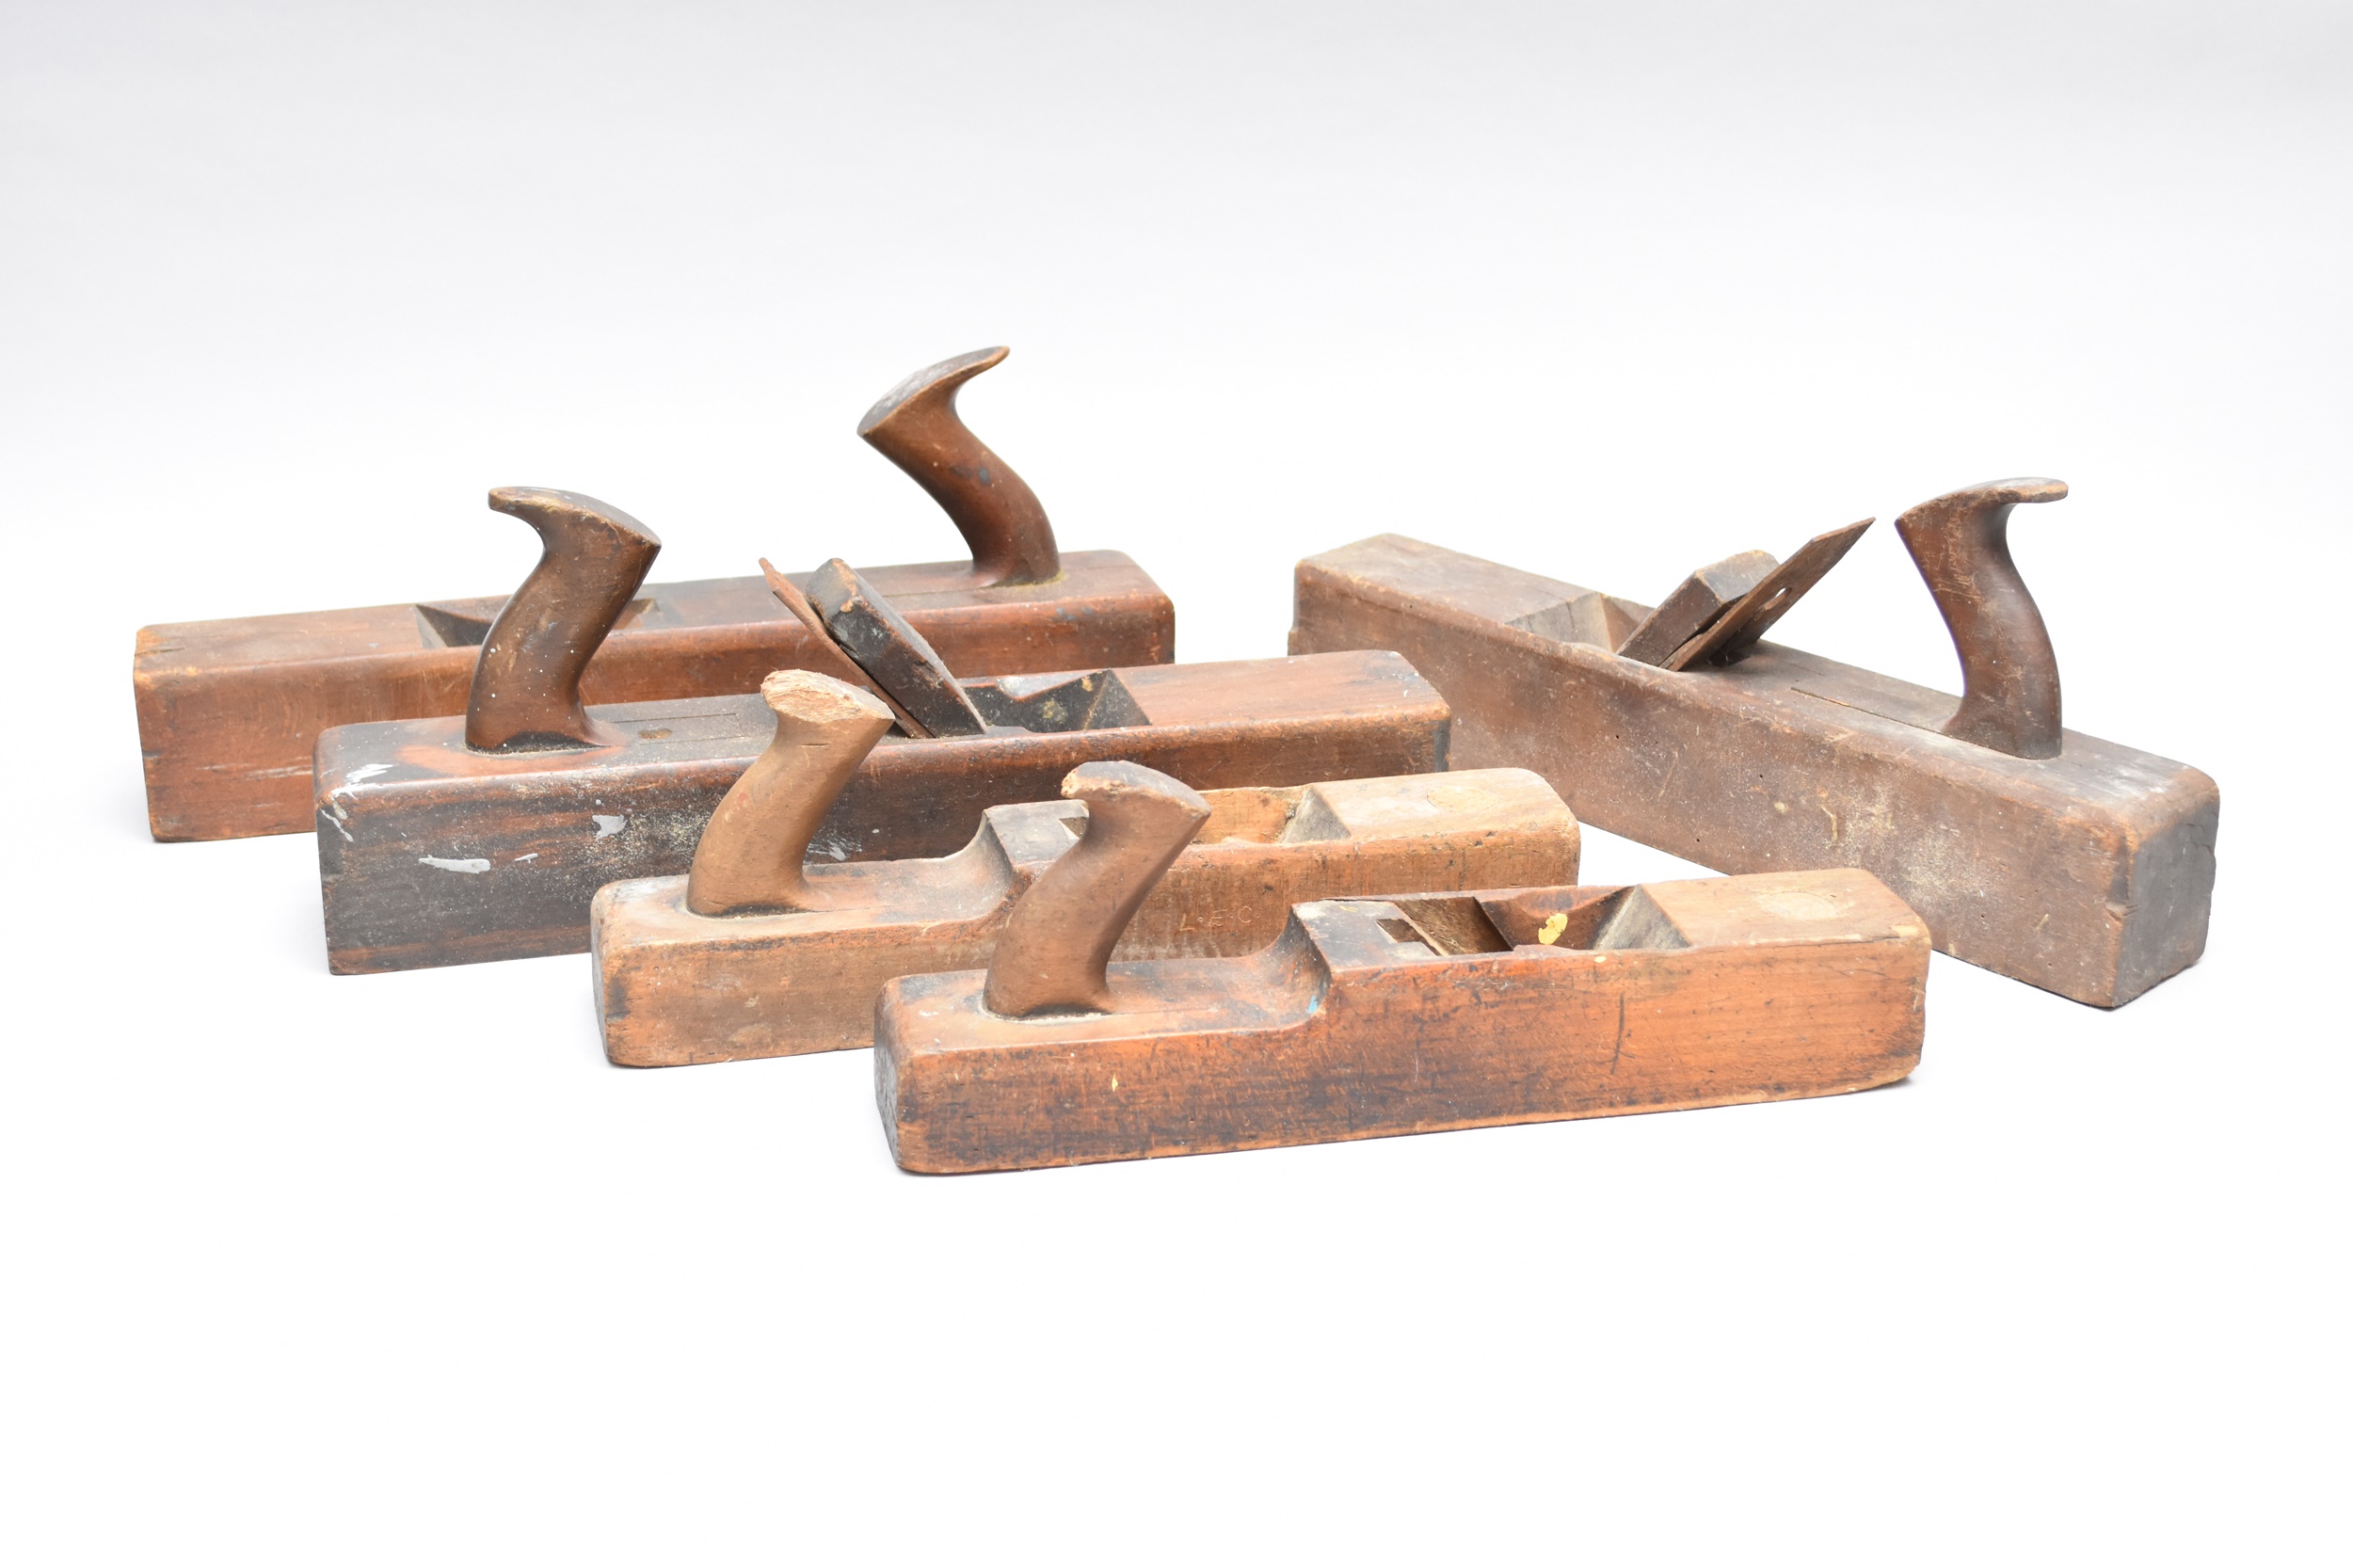 A group of five vintage wood block planes